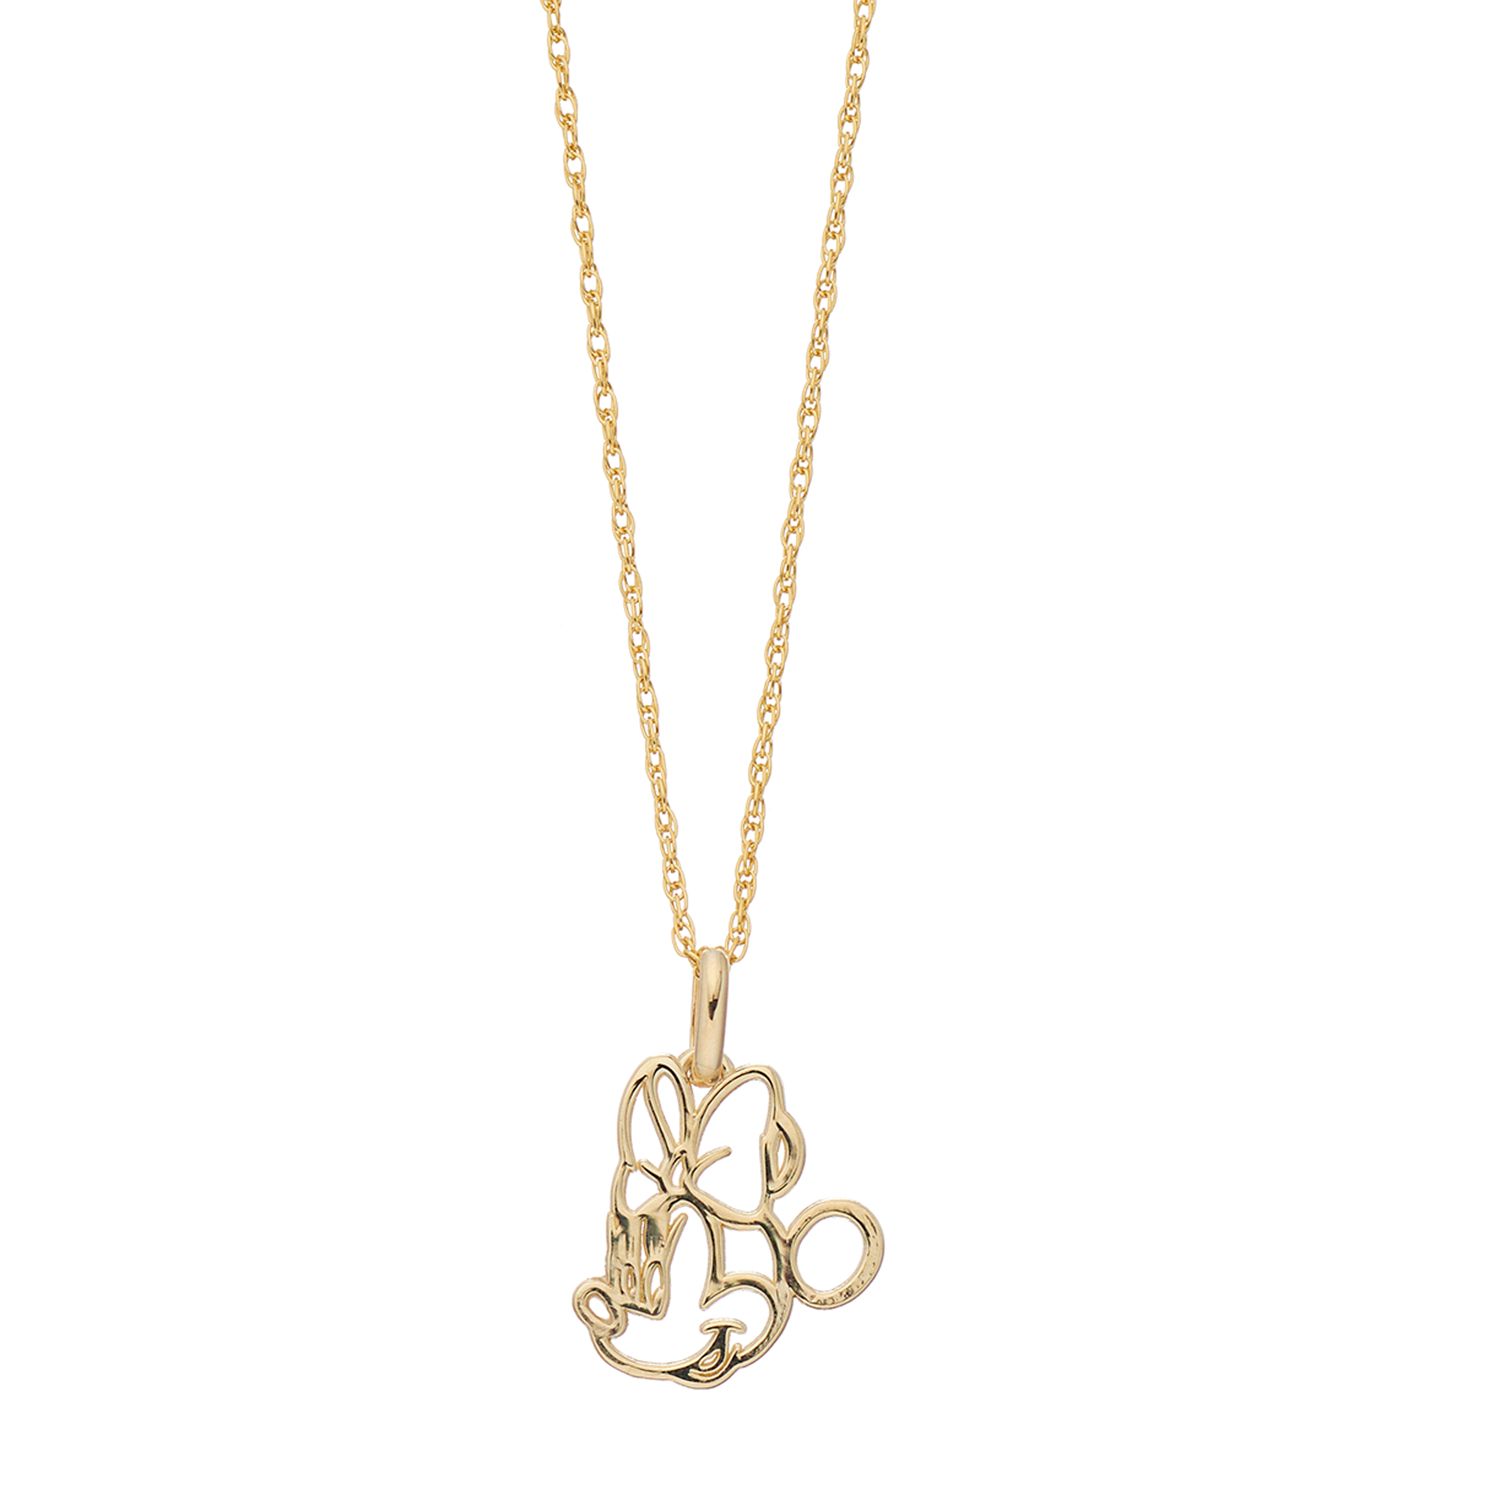 Image for Disney 's Minnie Mouse 10k Gold Outline Pendant Necklace at Kohl's.